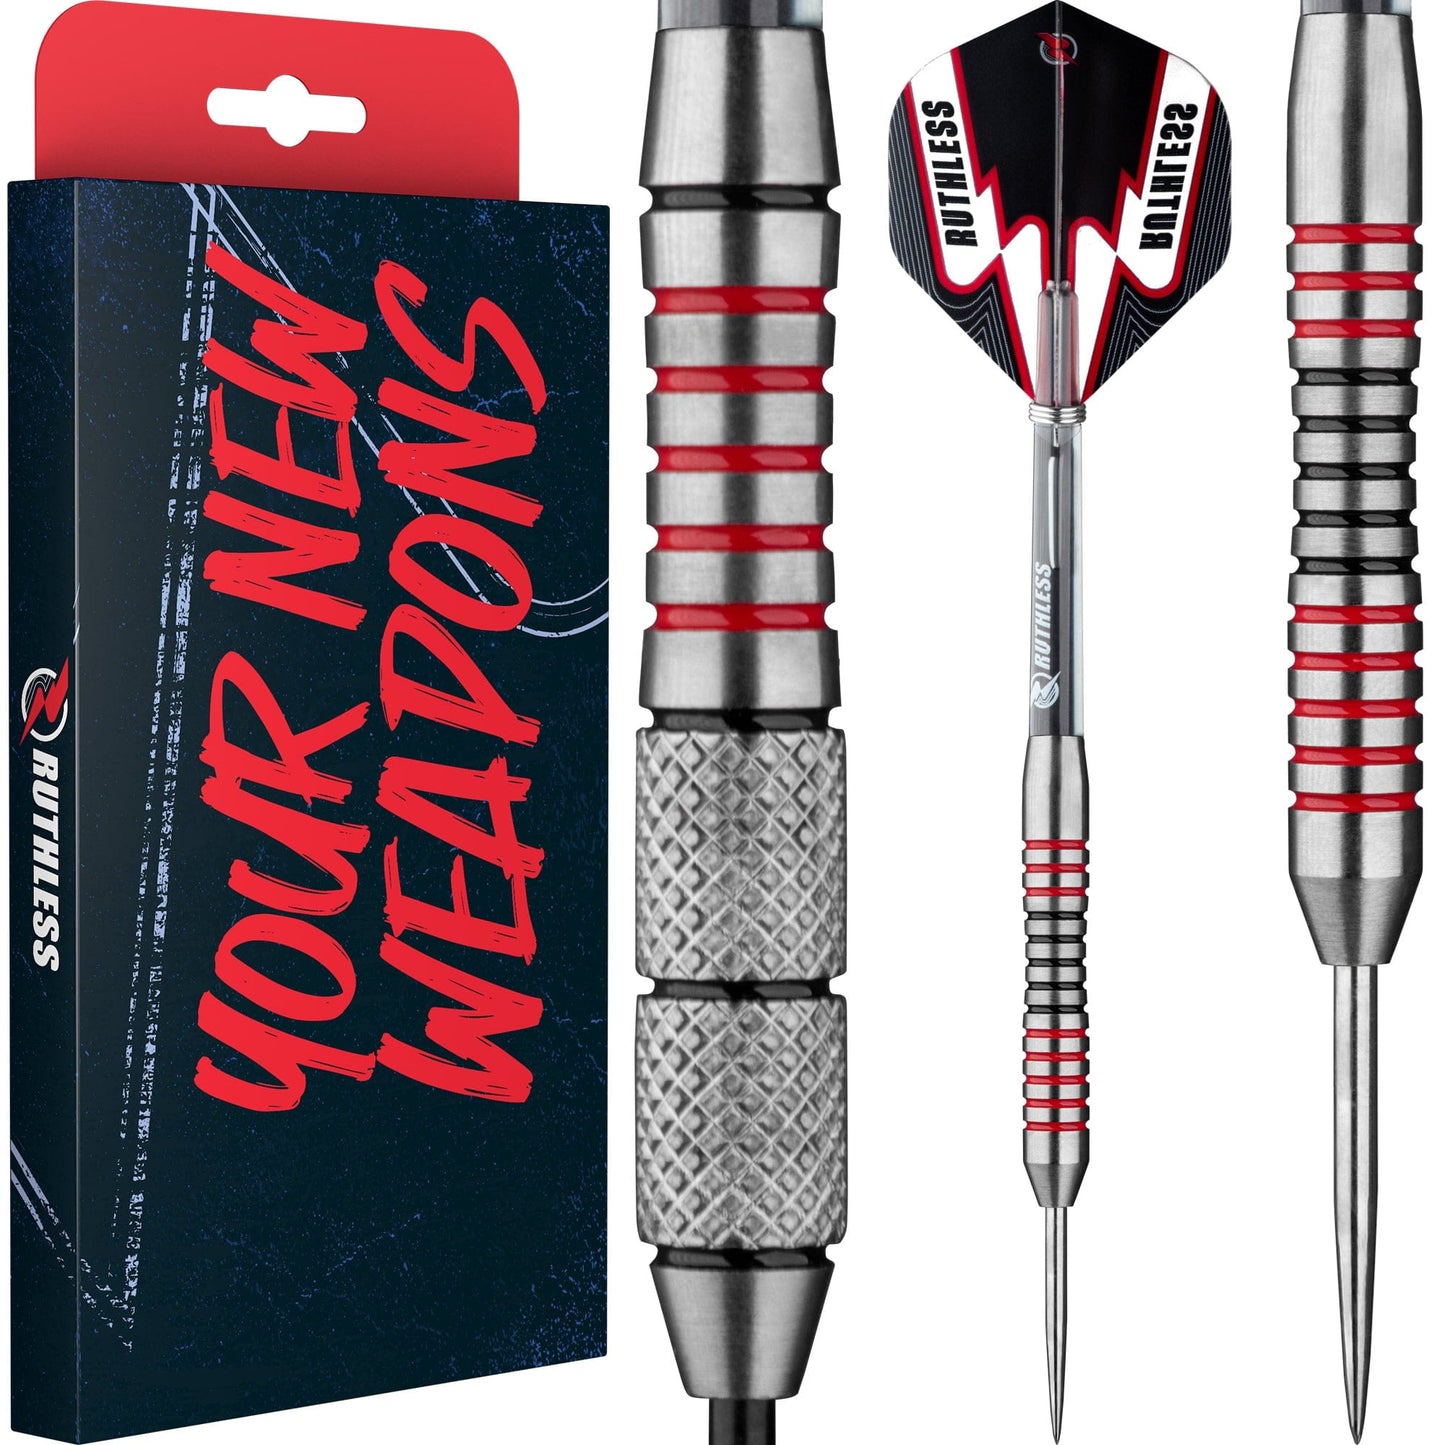 Ruthless Scallop Darts - Steel Tip - Ringed - Black & Red - 26g 26g